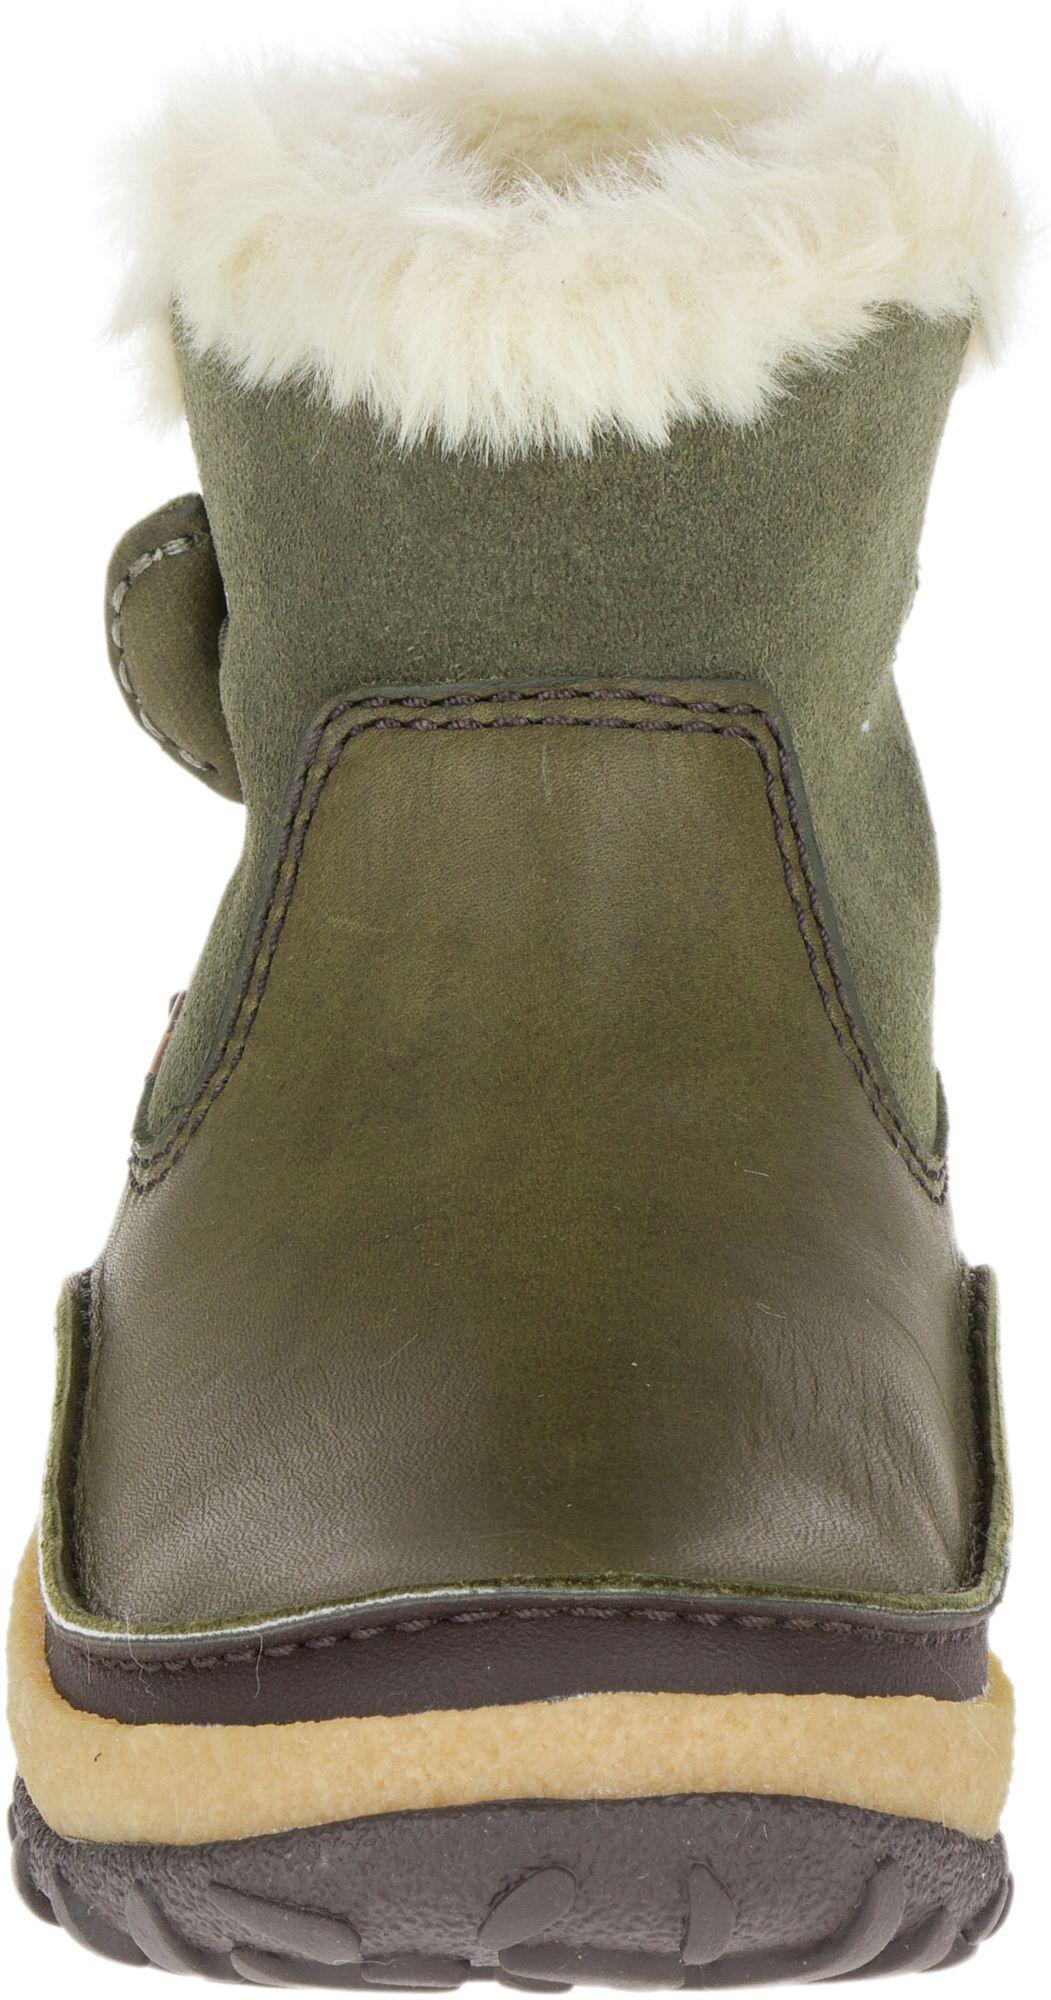 Merrell Tremblant Pull On Polar Waterproof Snow Boot in Dusty Olive Leather  (Green) - Lyst